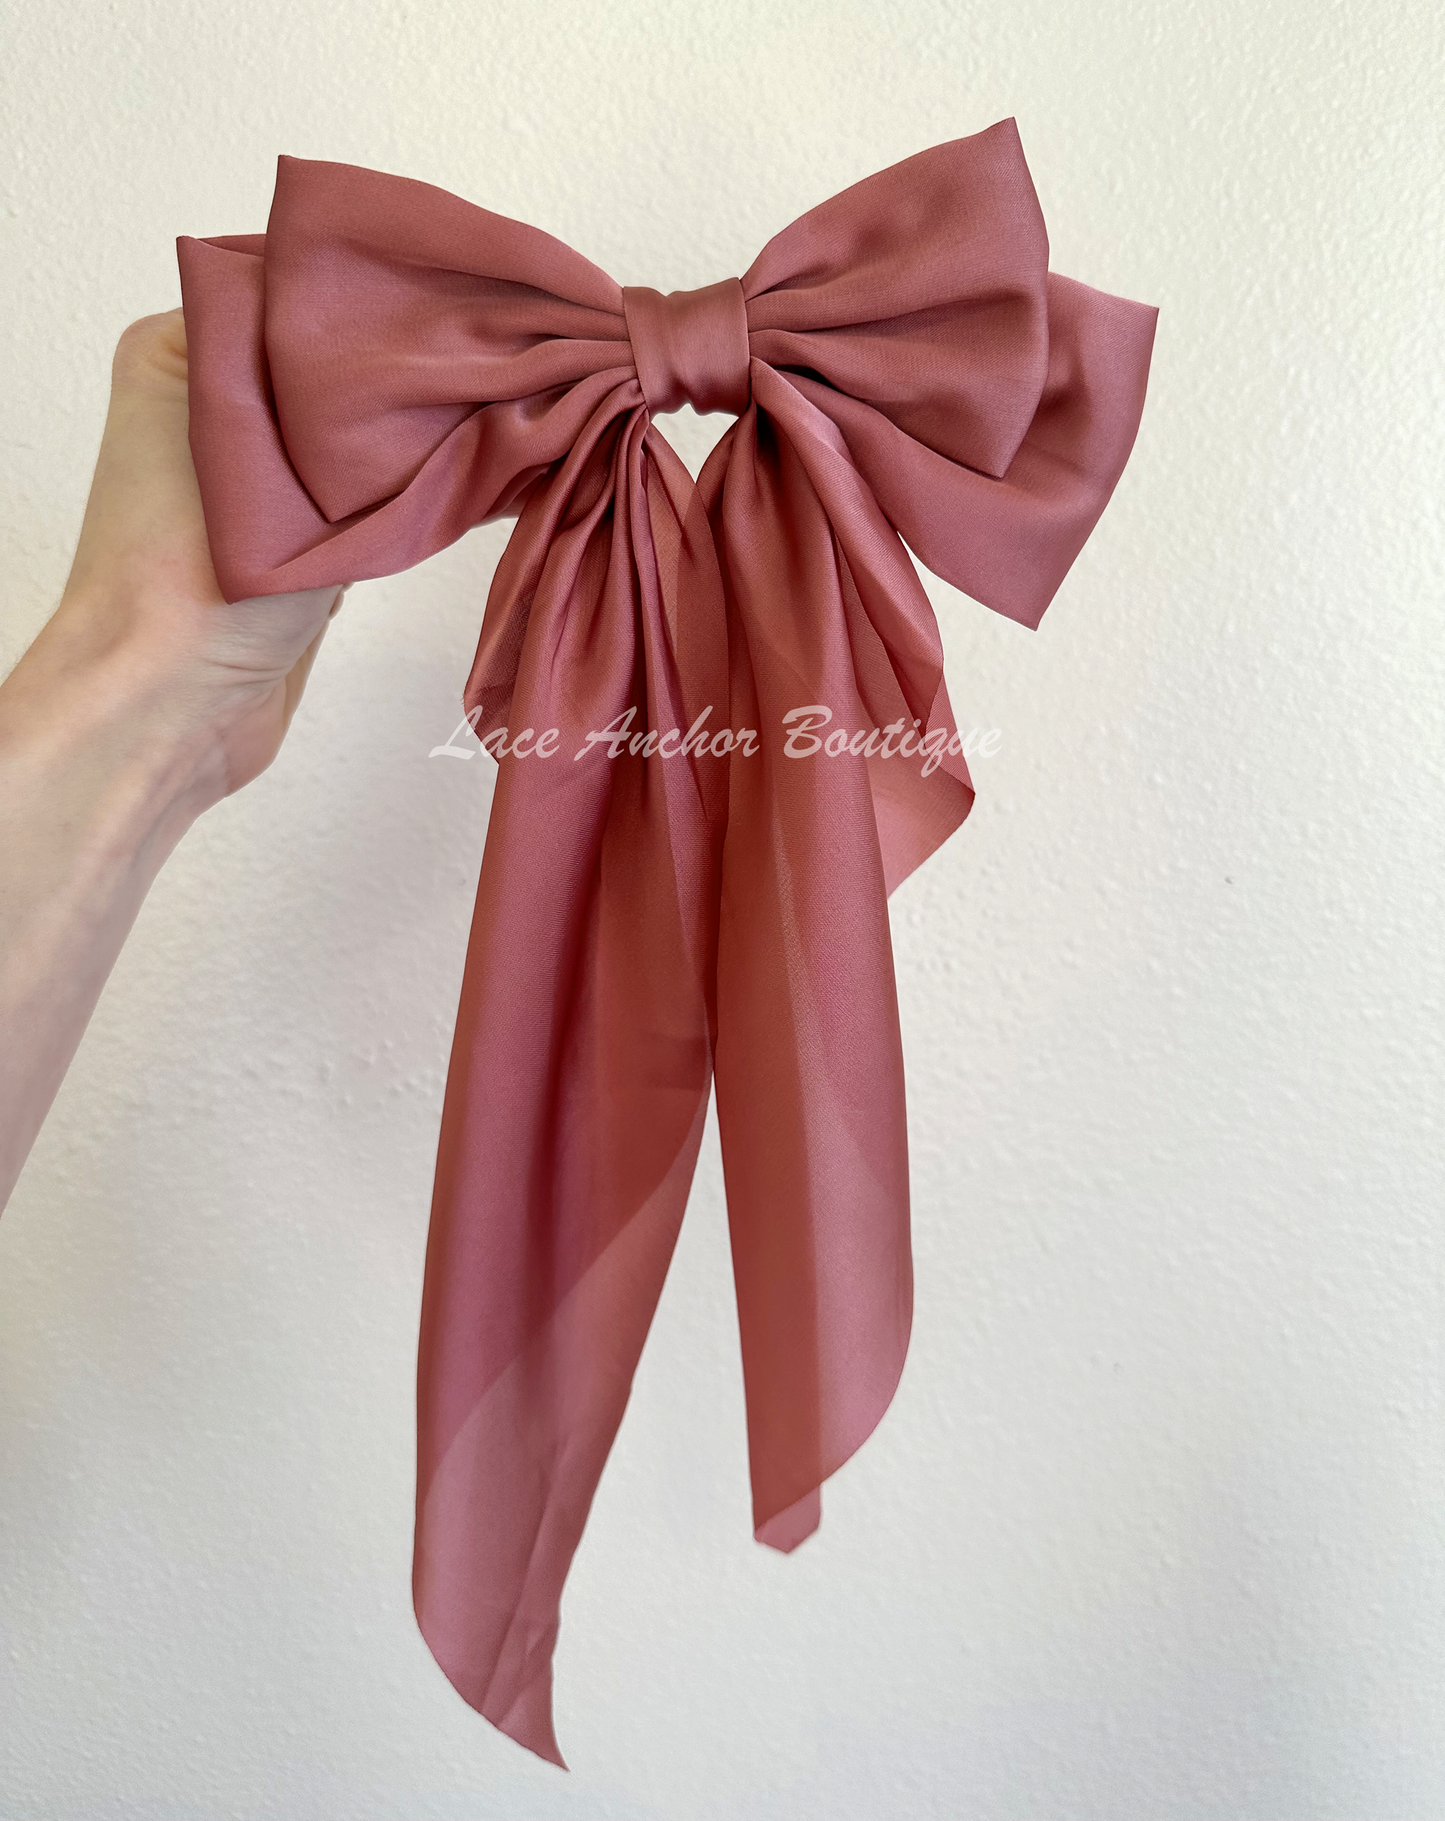 silk sikly sailor long tail girls hair bow in mauve rose pink